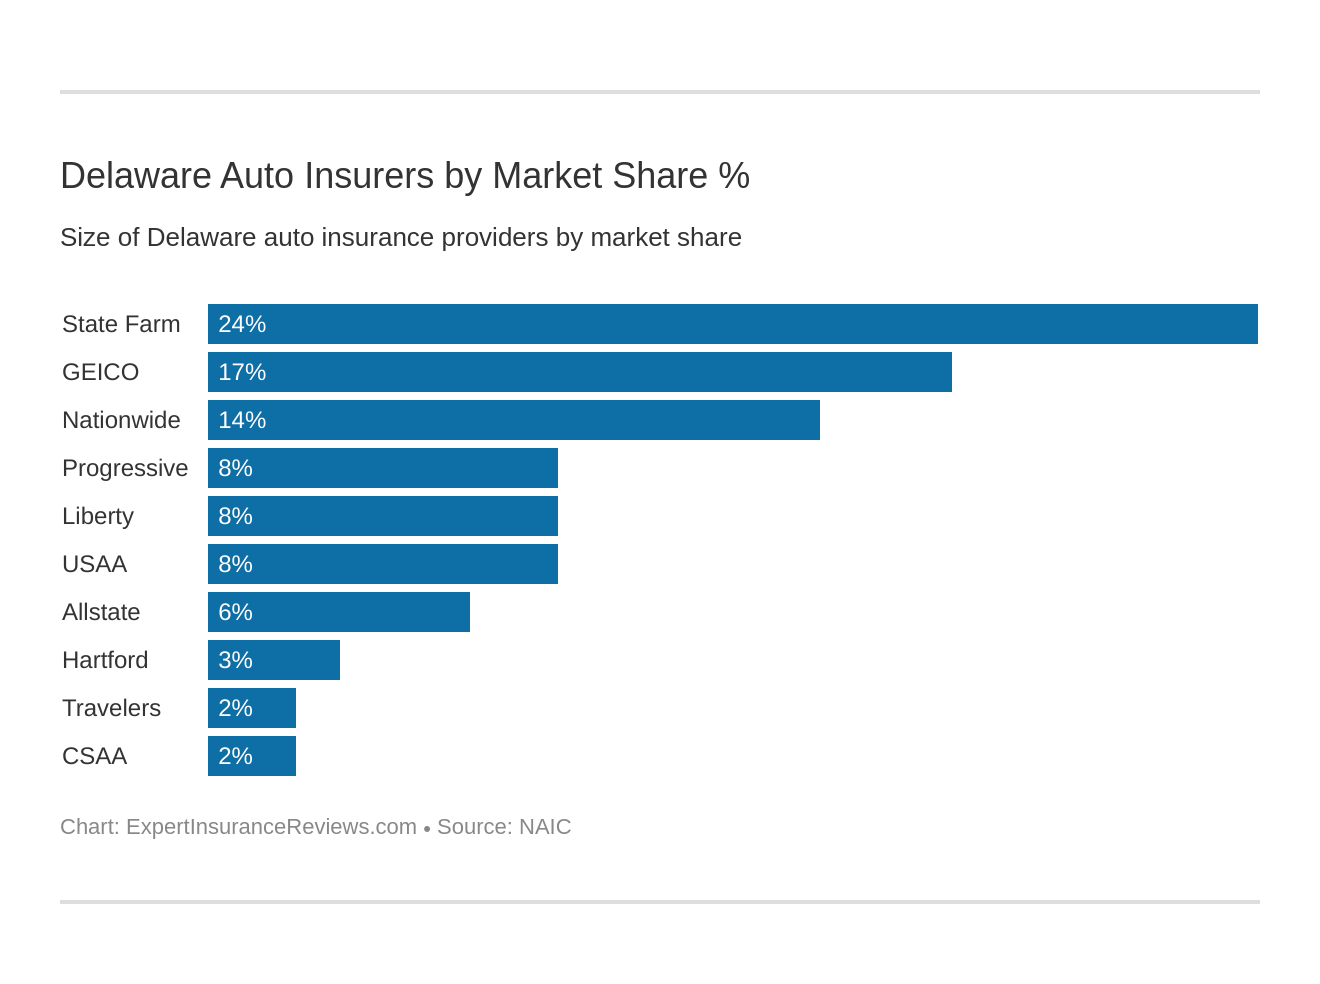 Delaware Auto Insurers by Market Share %